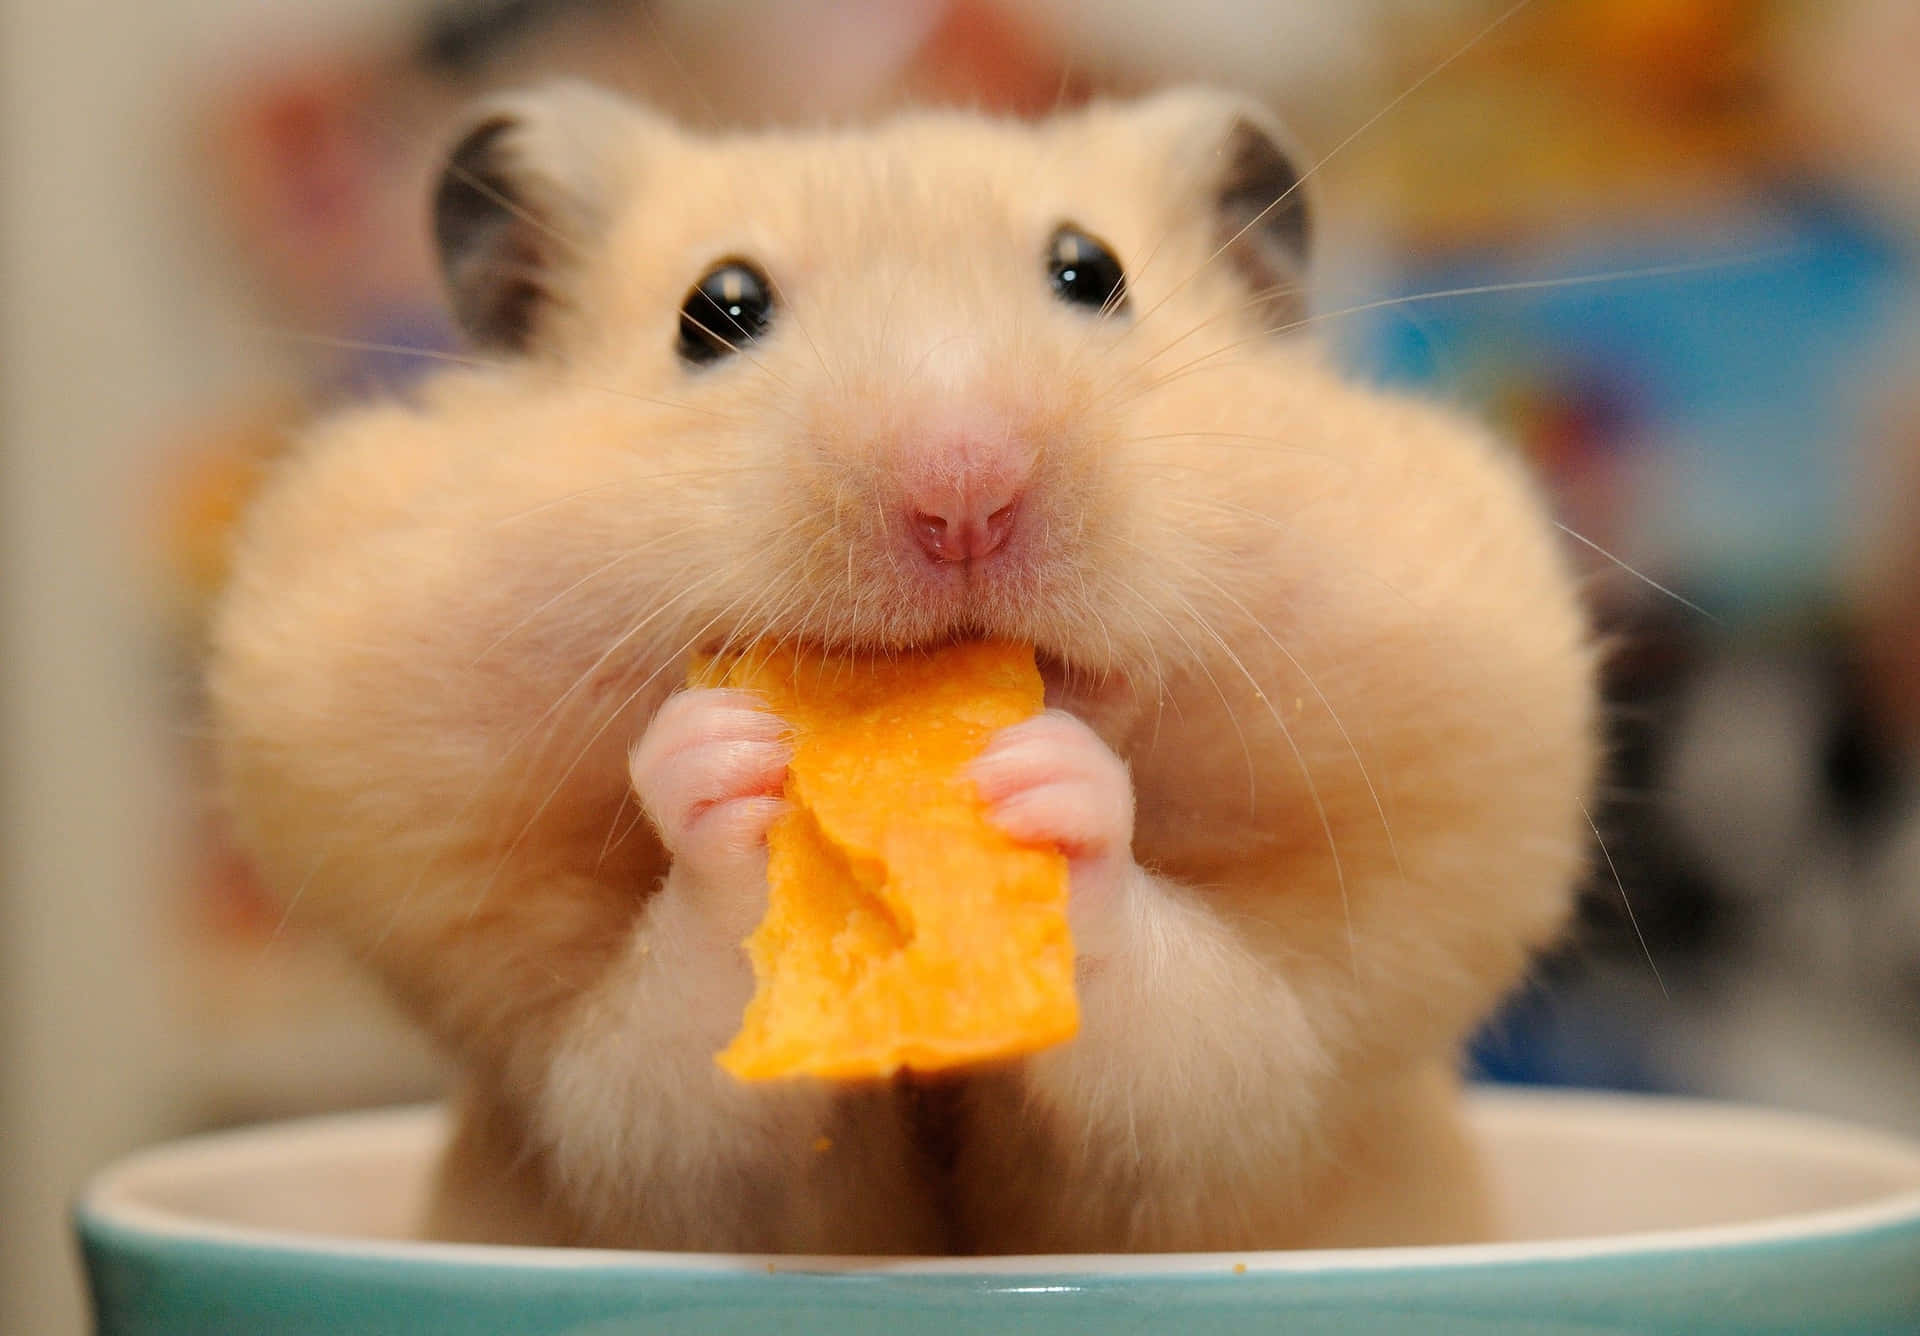 A curious mouse indulging in a delicious potato chip feast. Wallpaper